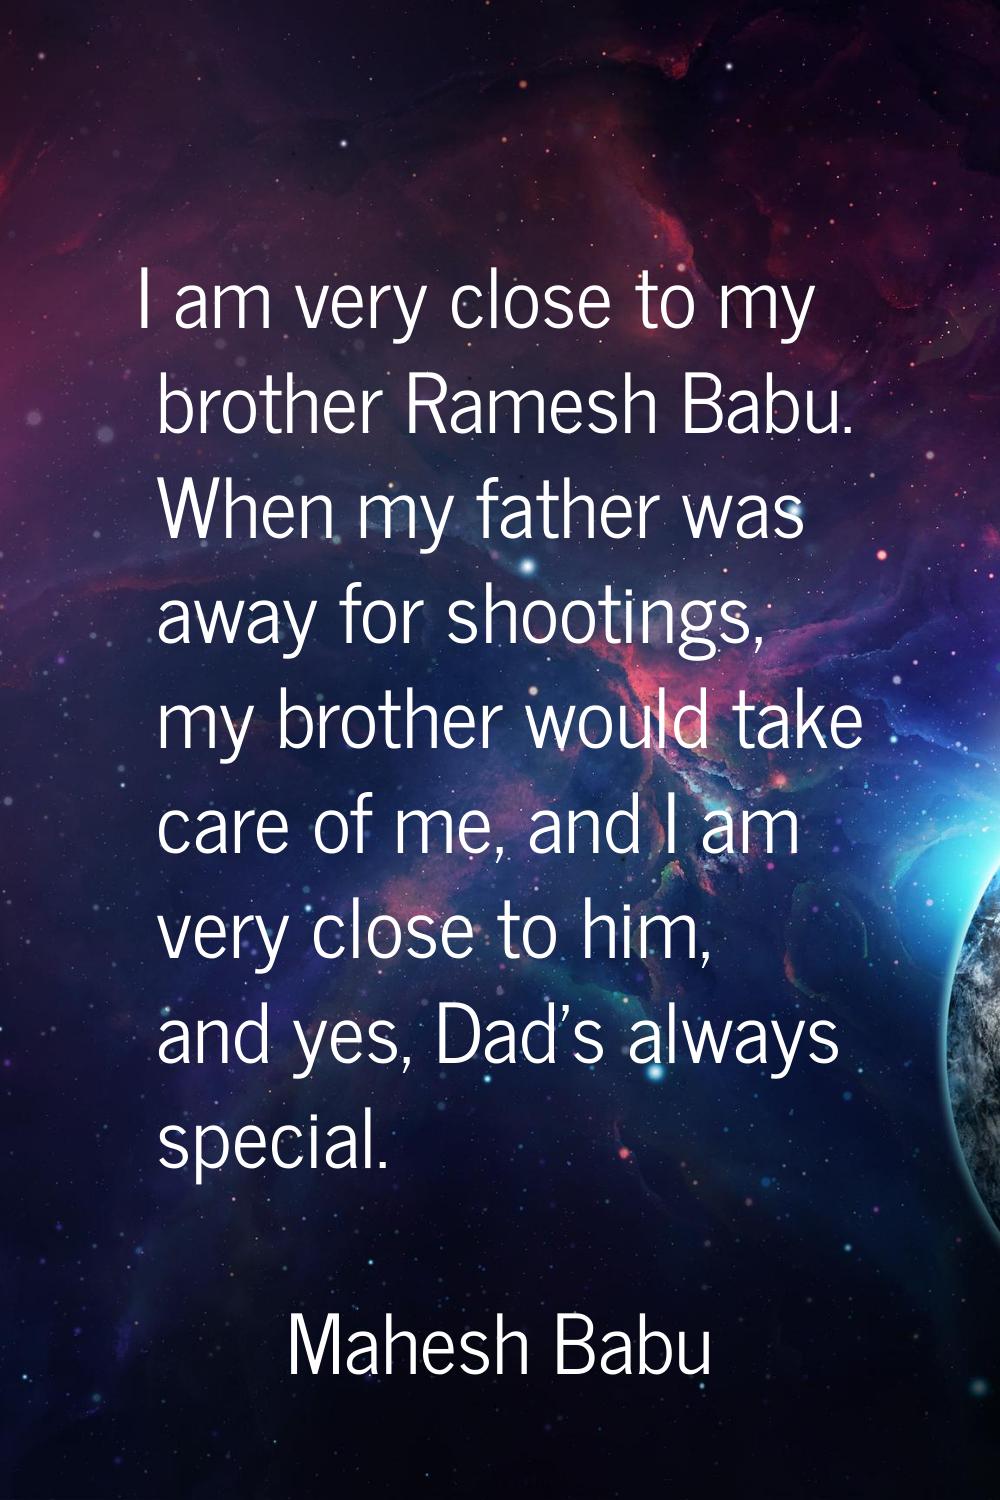 I am very close to my brother Ramesh Babu. When my father was away for shootings, my brother would 